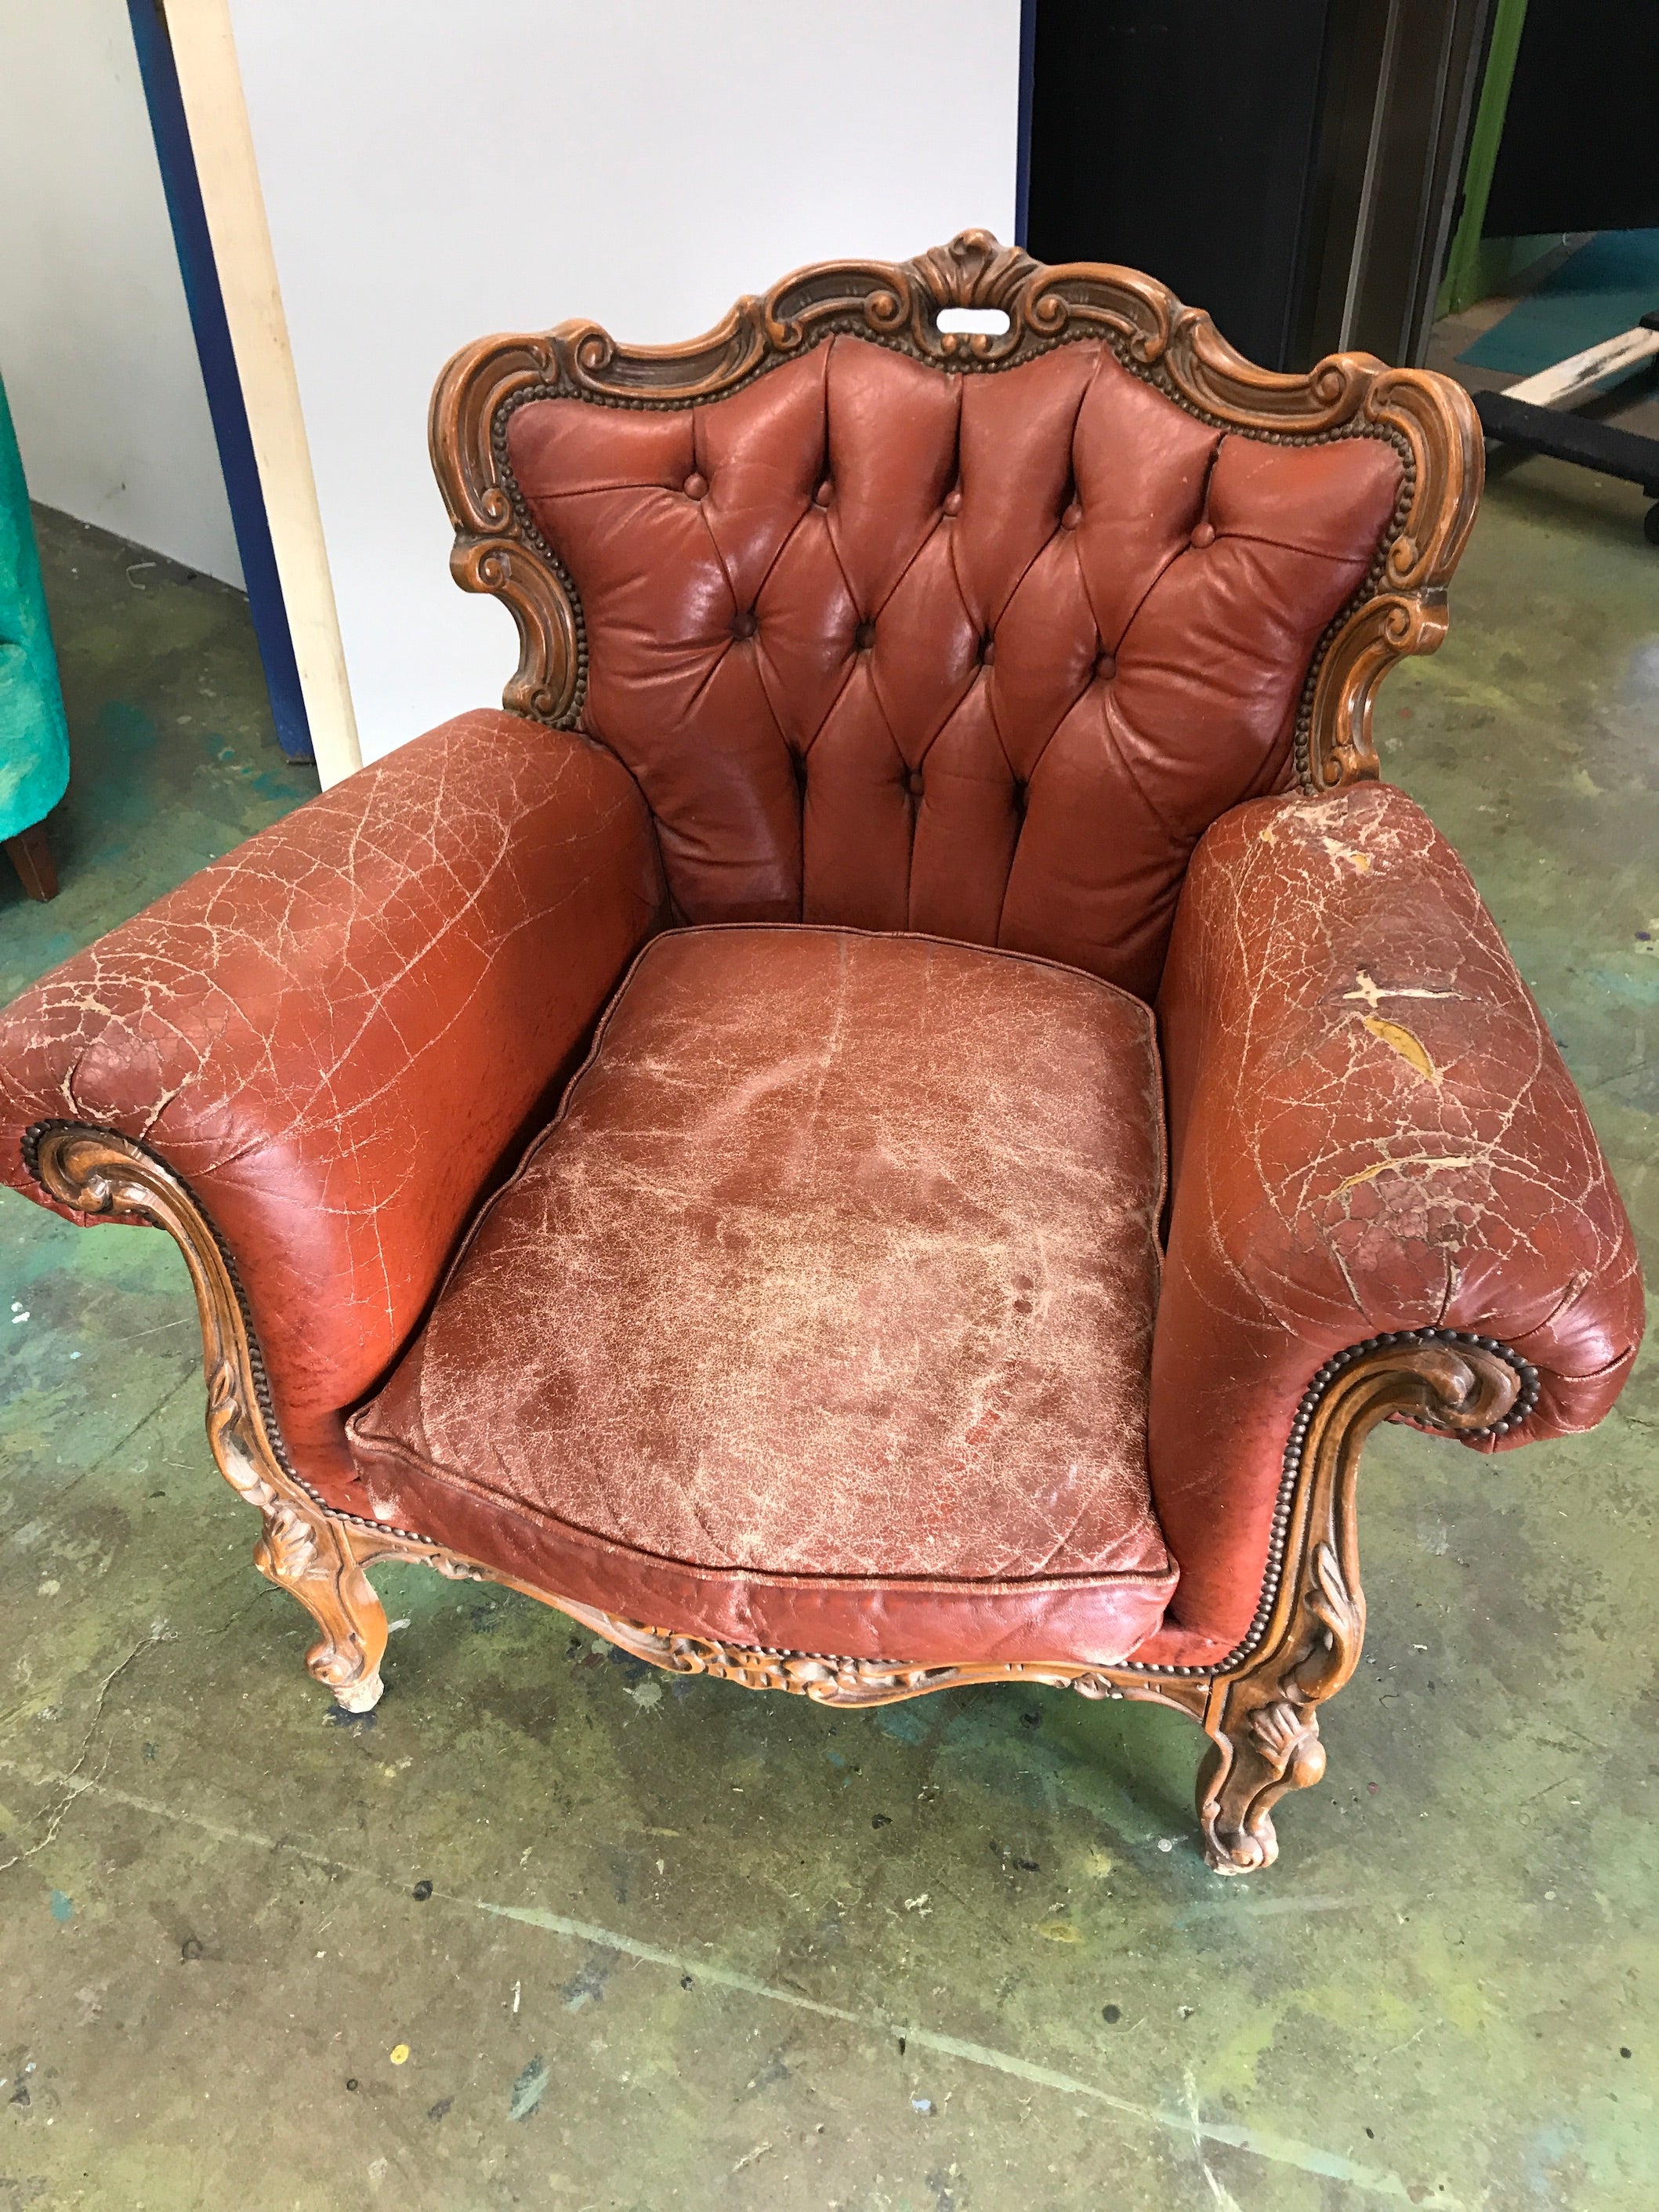 Painting A Leather Chair A Year Later - MAKEUP FOR MATURE SKIN